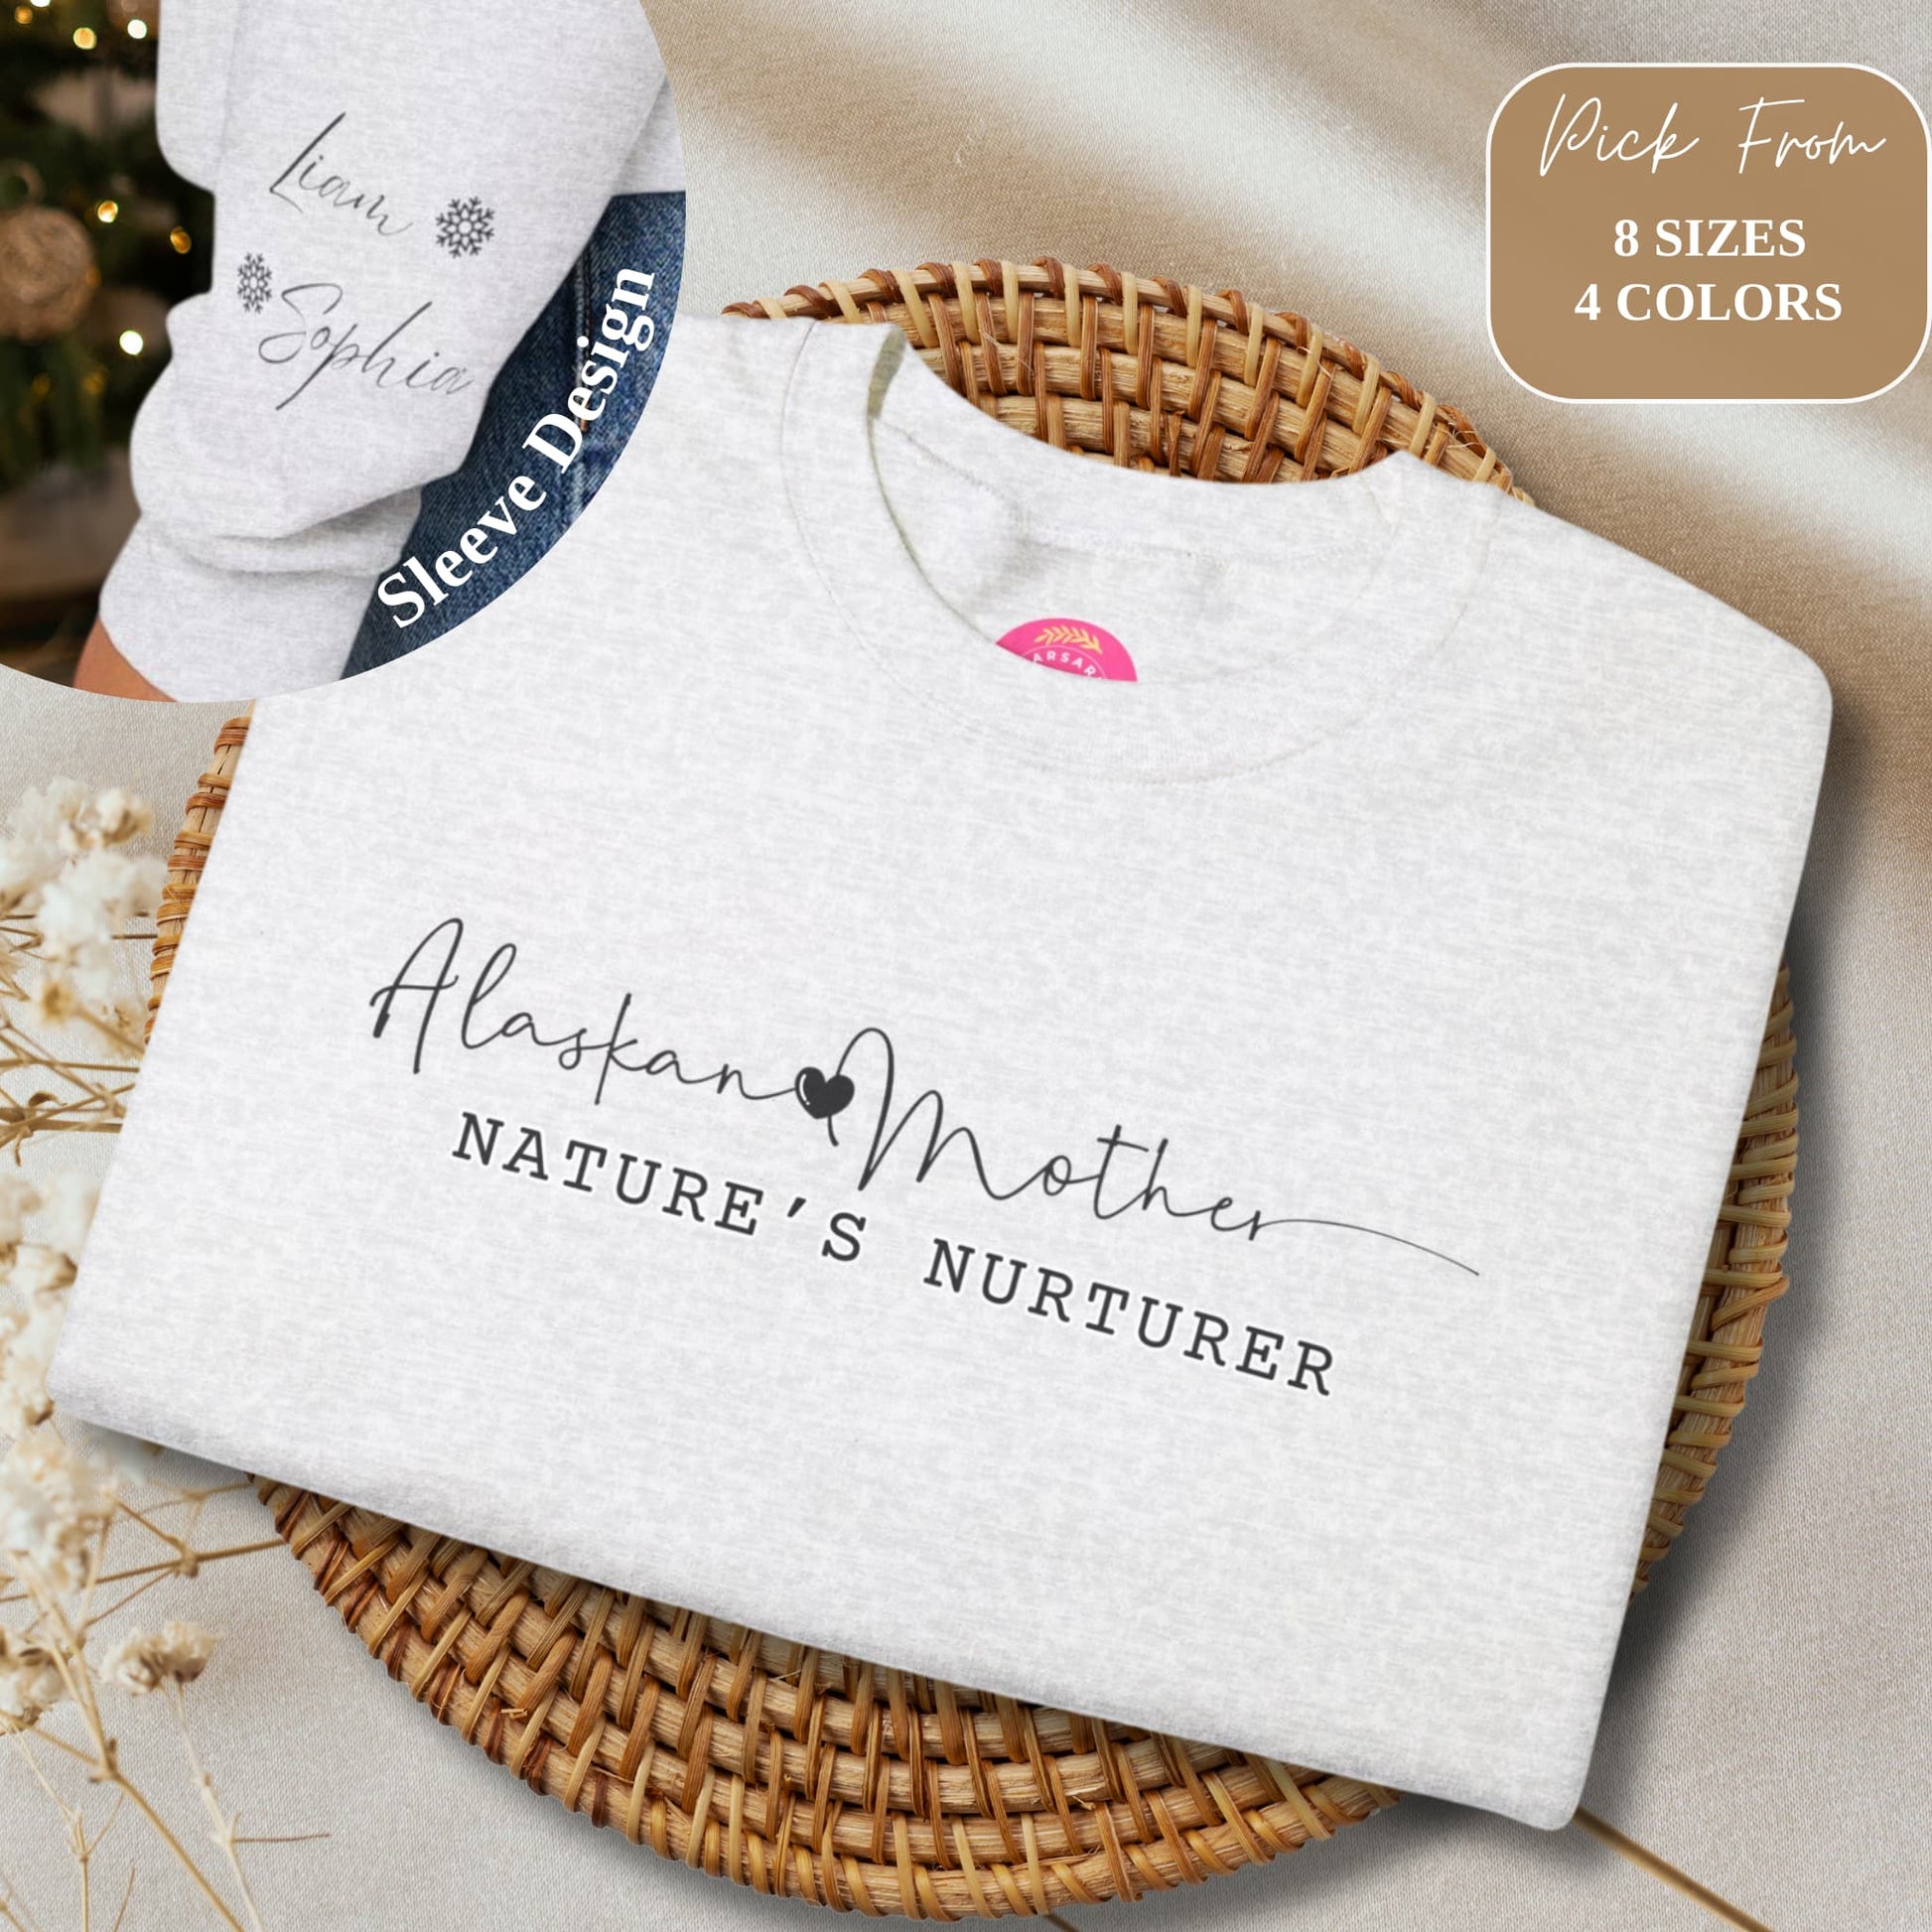 Folded Alaskan Mother Personalized Crewneck Sweatshirt on a beige background, featuring sleeve design with kids' names and snowflake detail.